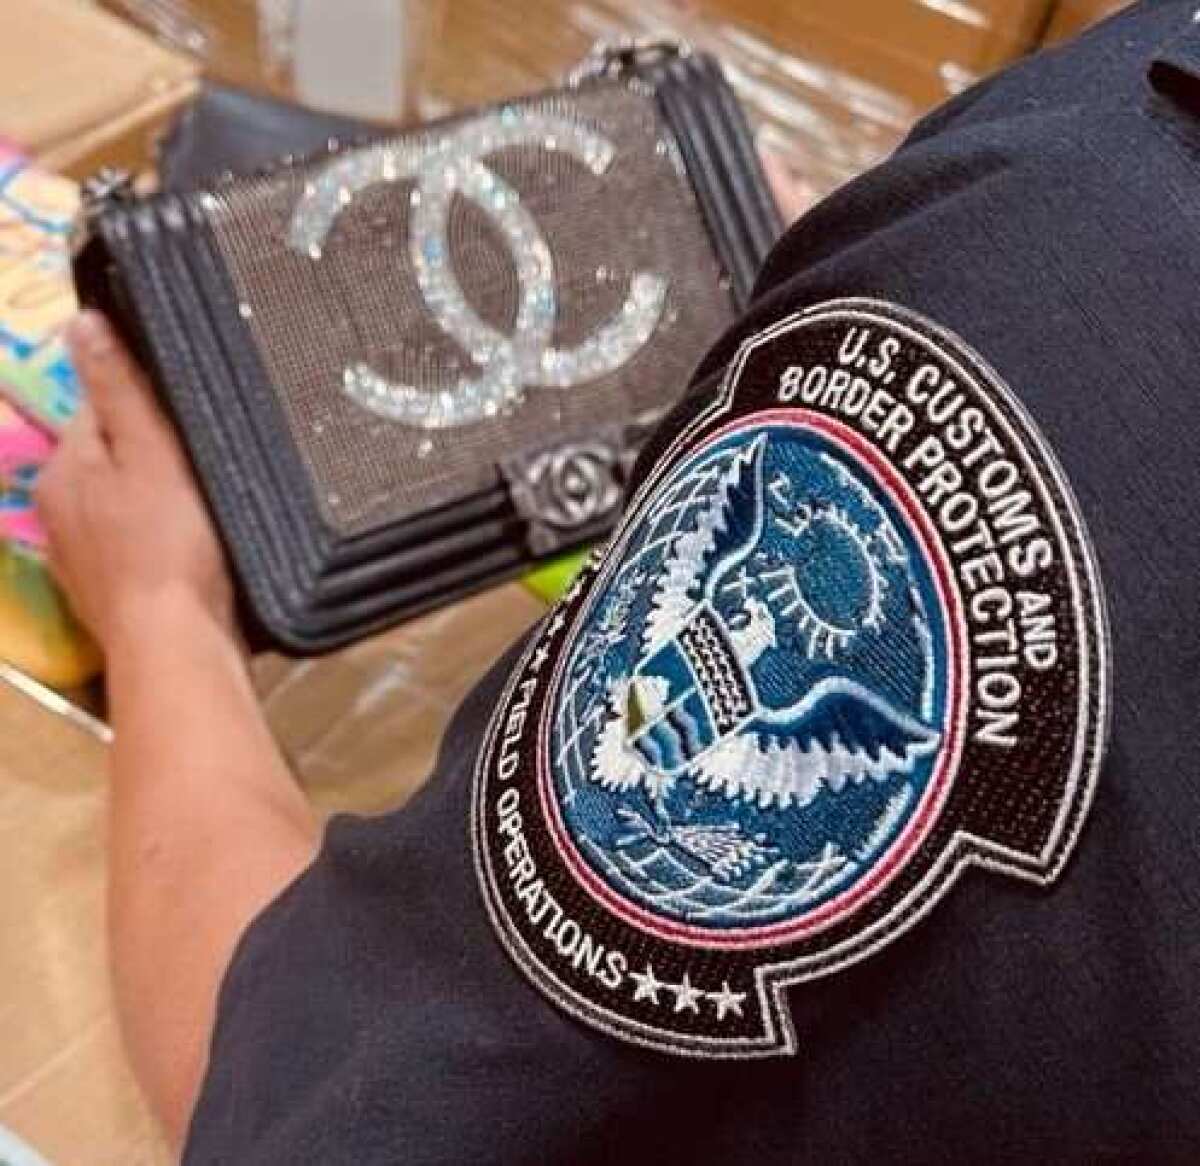 A customs officer holds a black bag with a large Chanel logo.